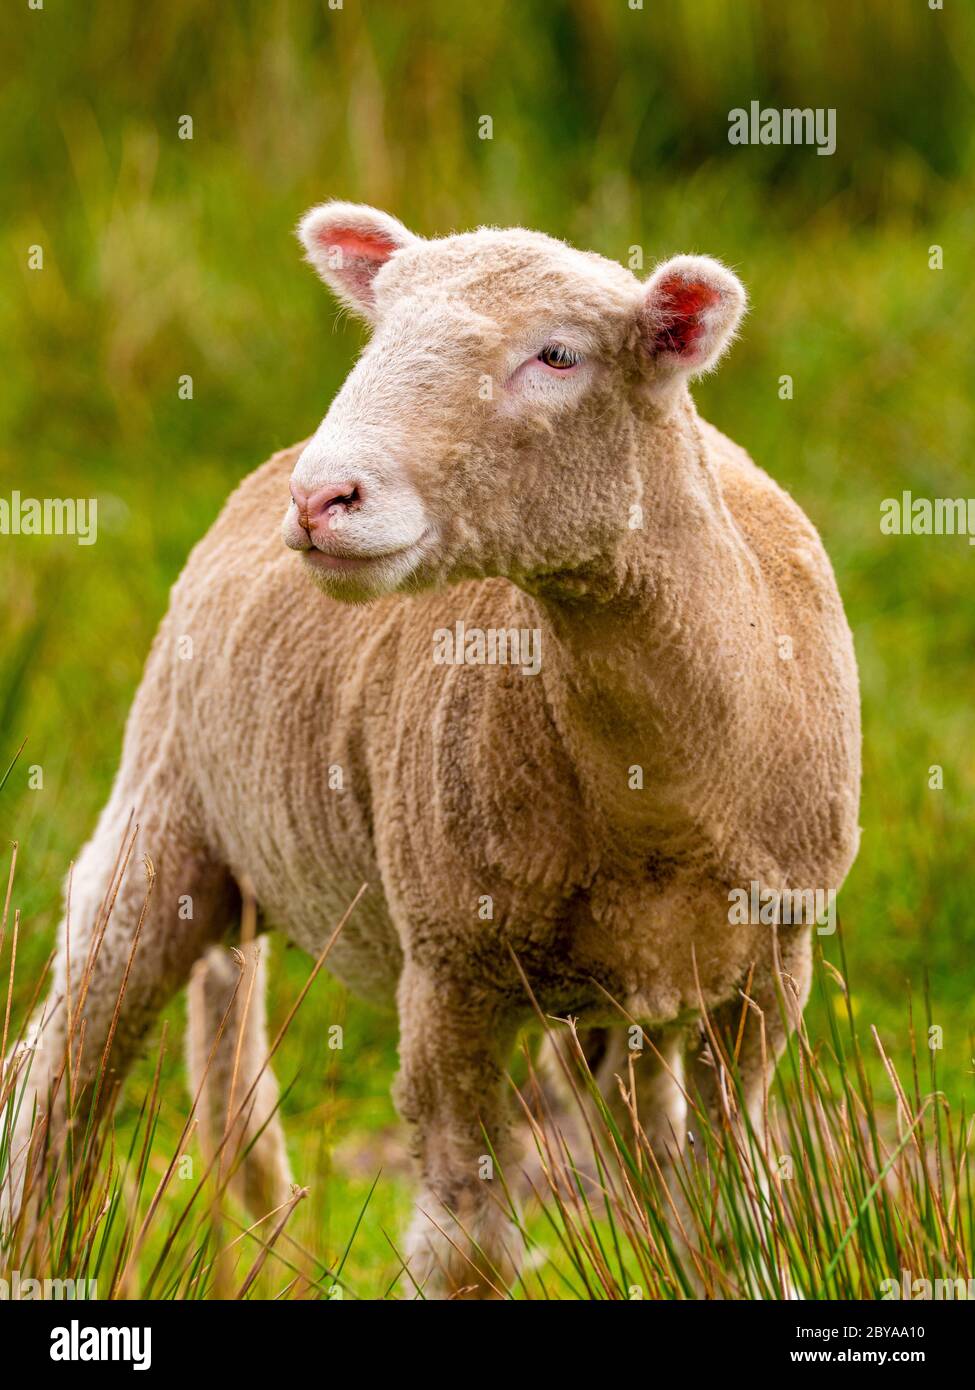 A single shorn sheep standing in a field. Lancashire UK Stock Photo